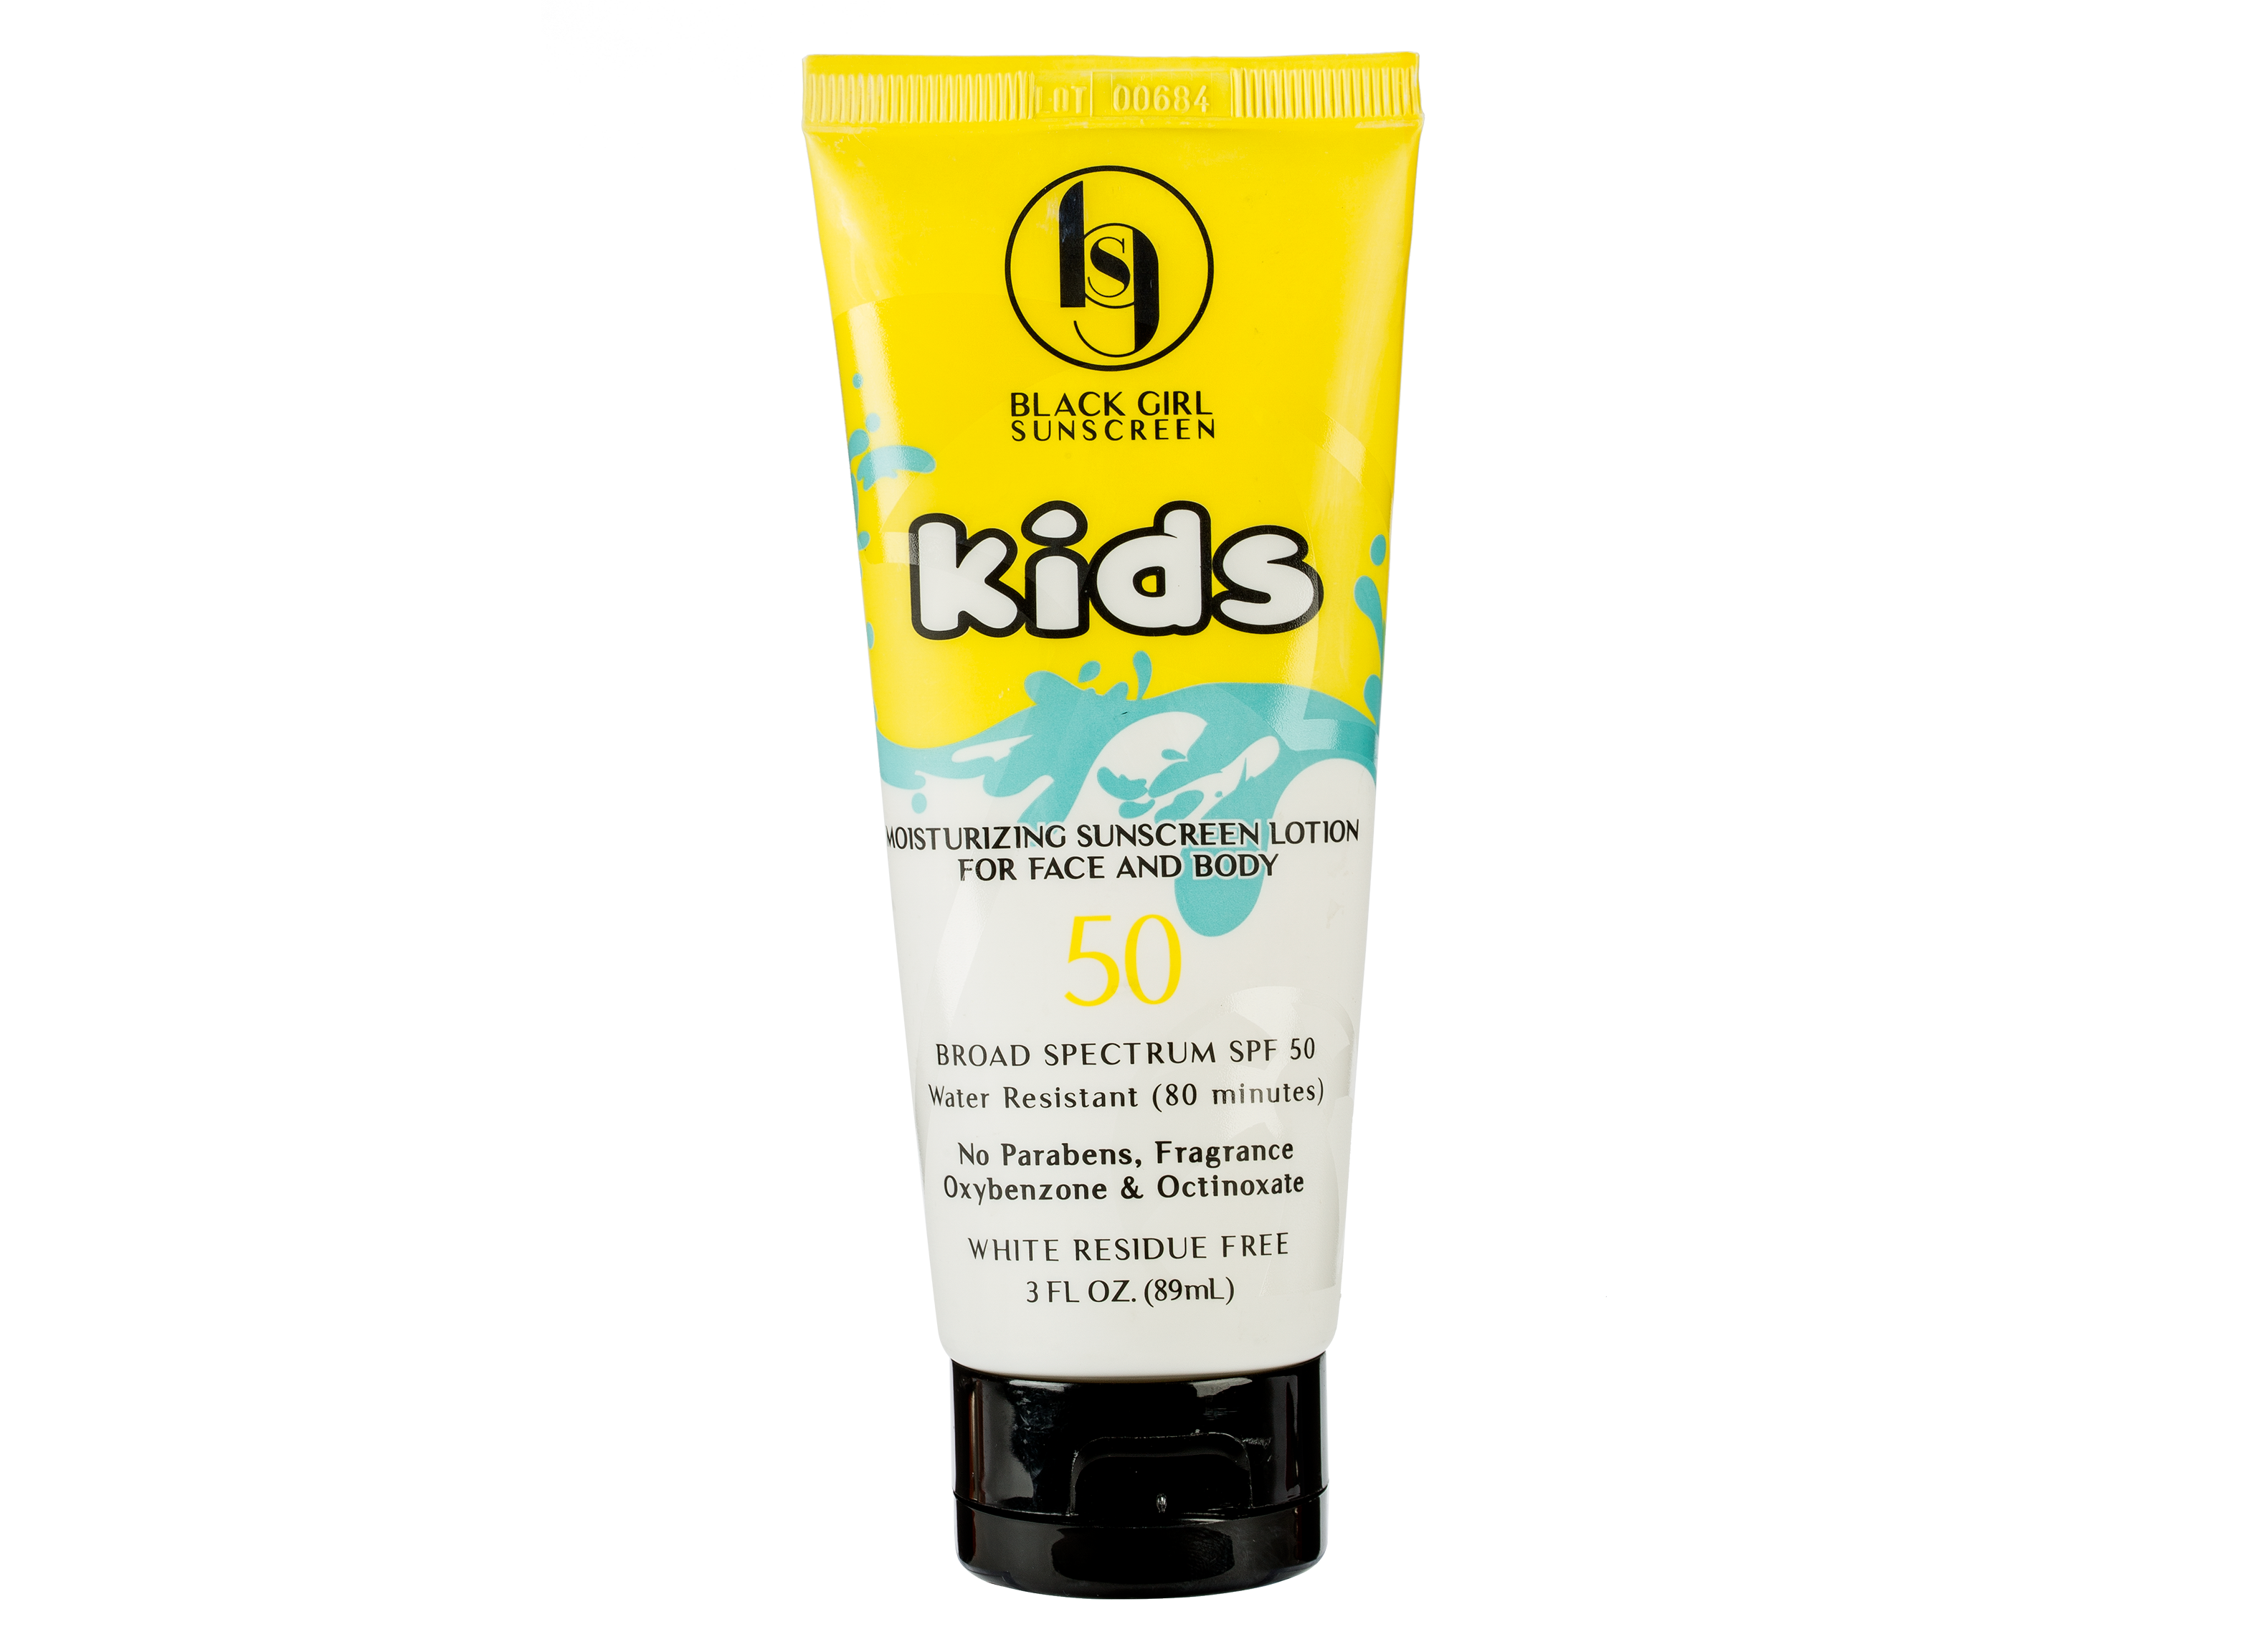 Review] Black Girl Sunscreen Kids SPF 50! Amazing especially for those who  wear makeup! : r/SkincareAddiction